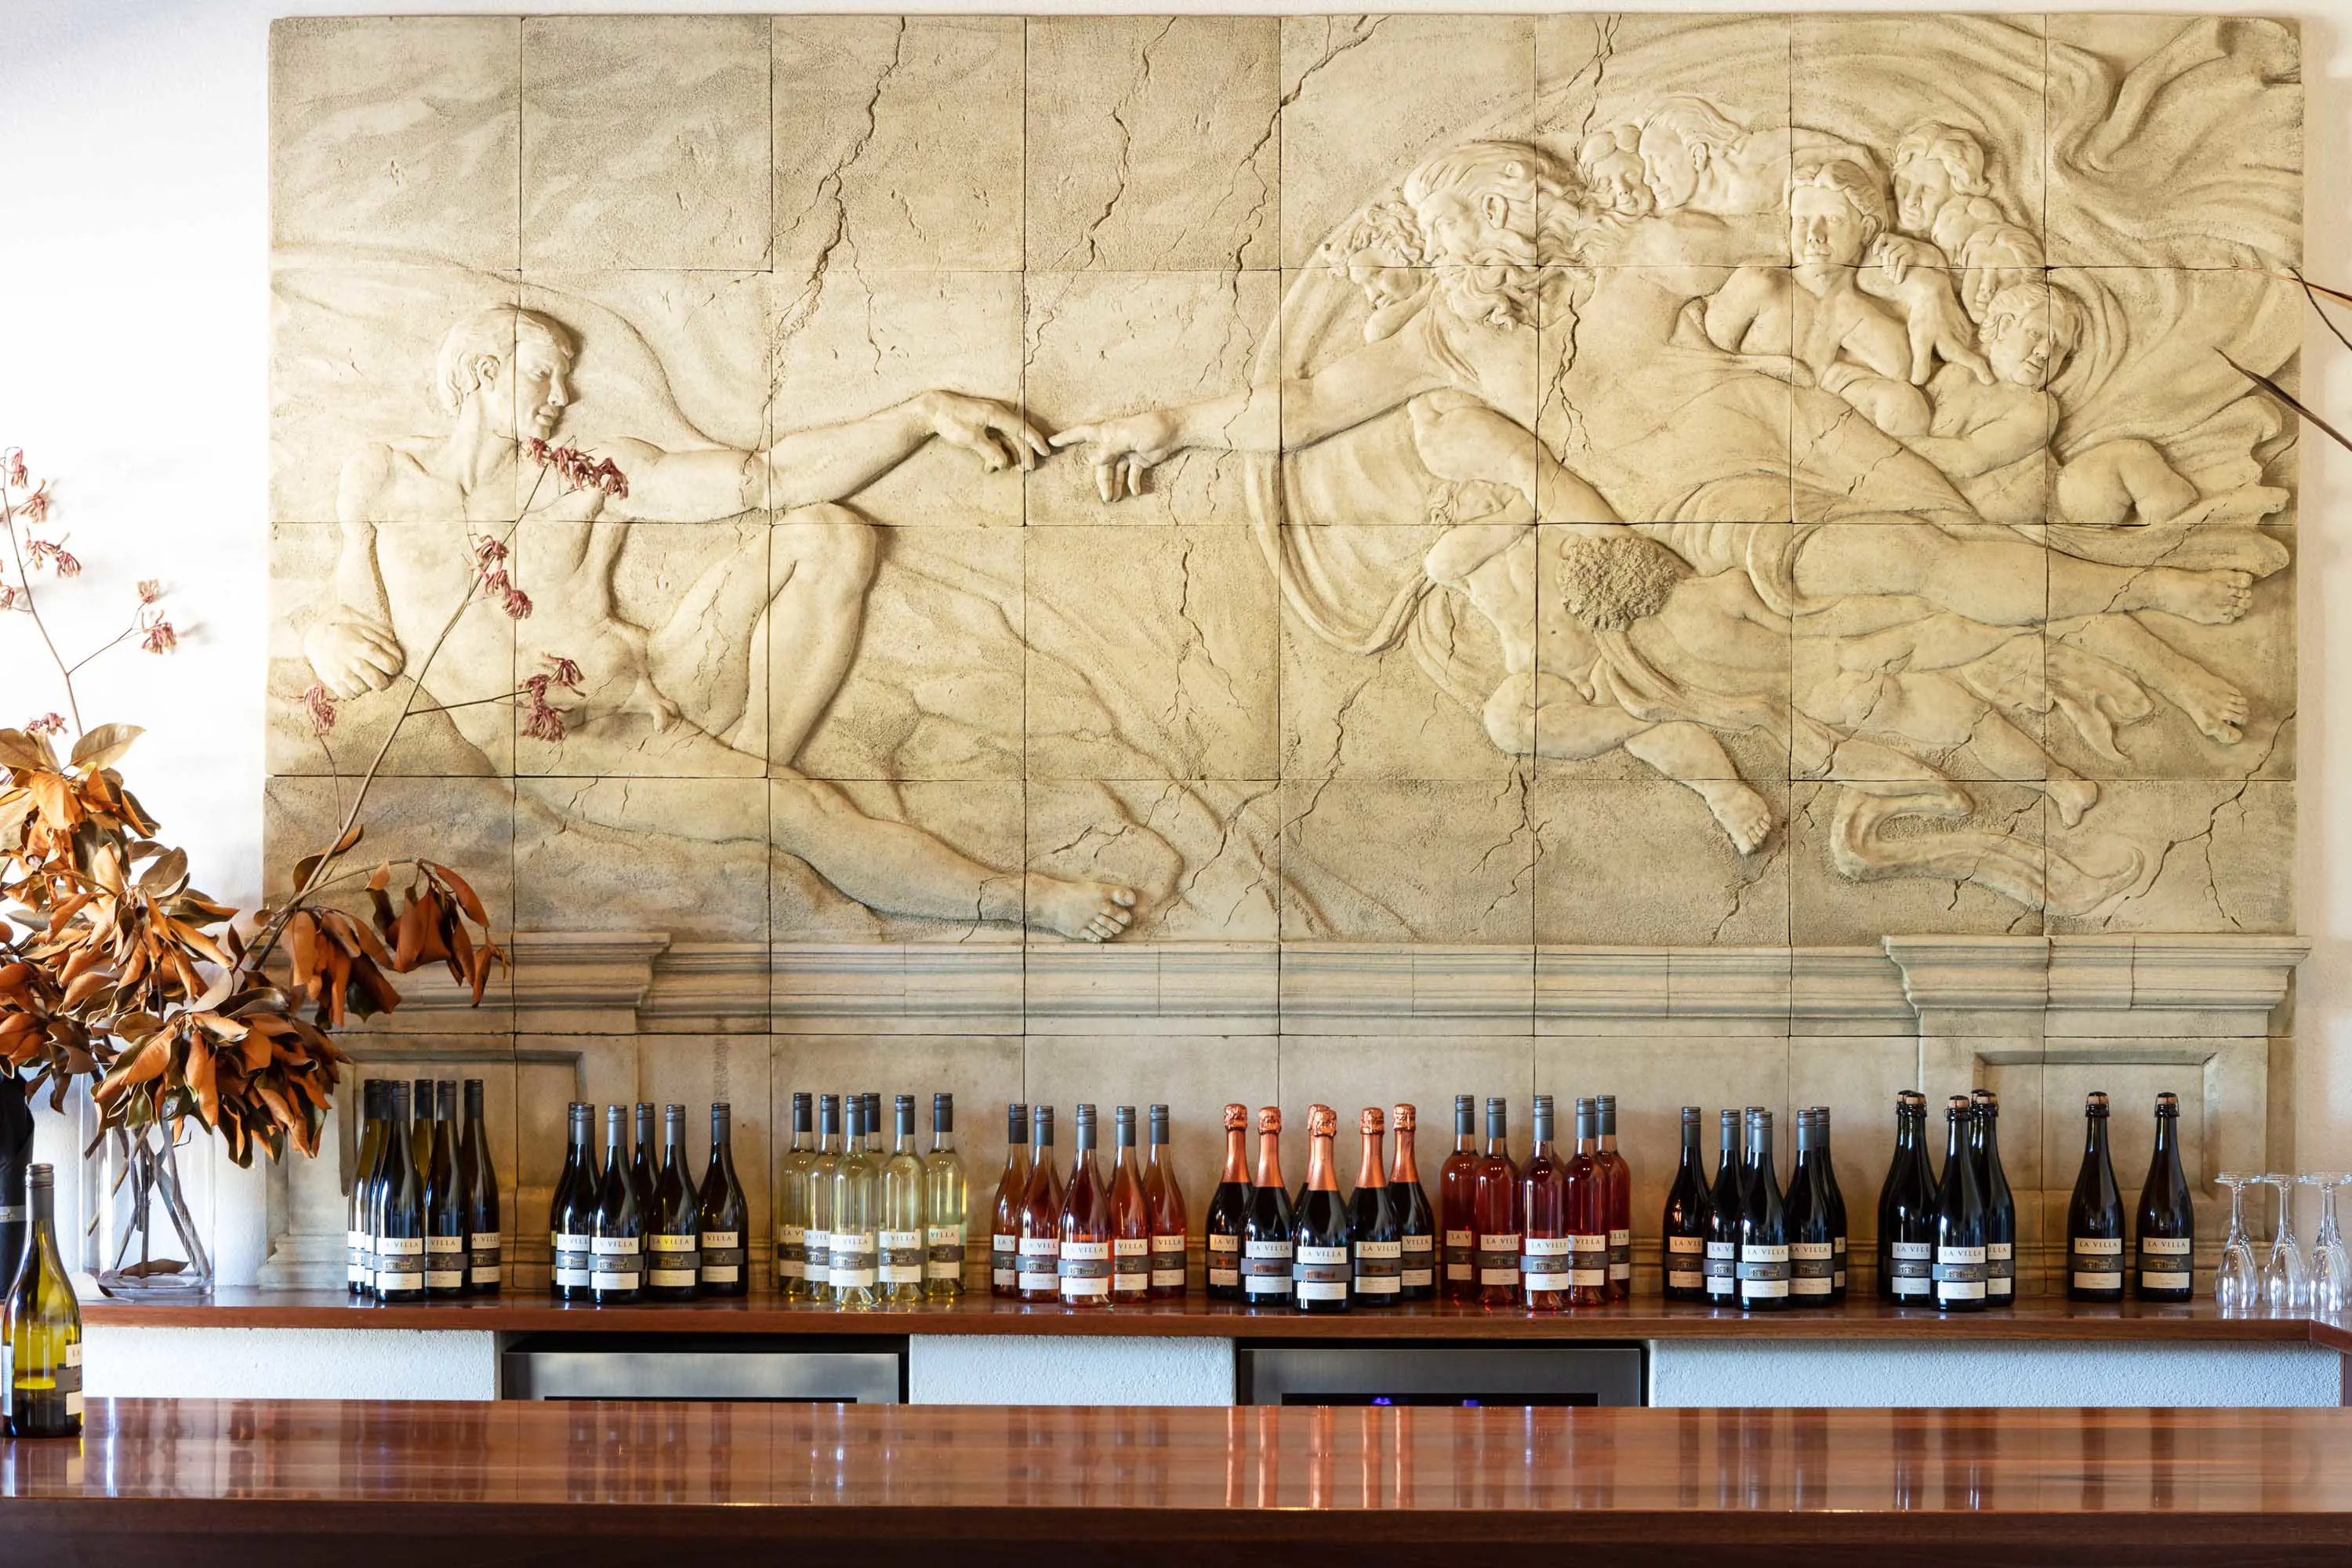 A stone relief recreation of Michelangelo's Creation of Adam is on a wall above rows of wine bottles sitting on a wooden shelf.